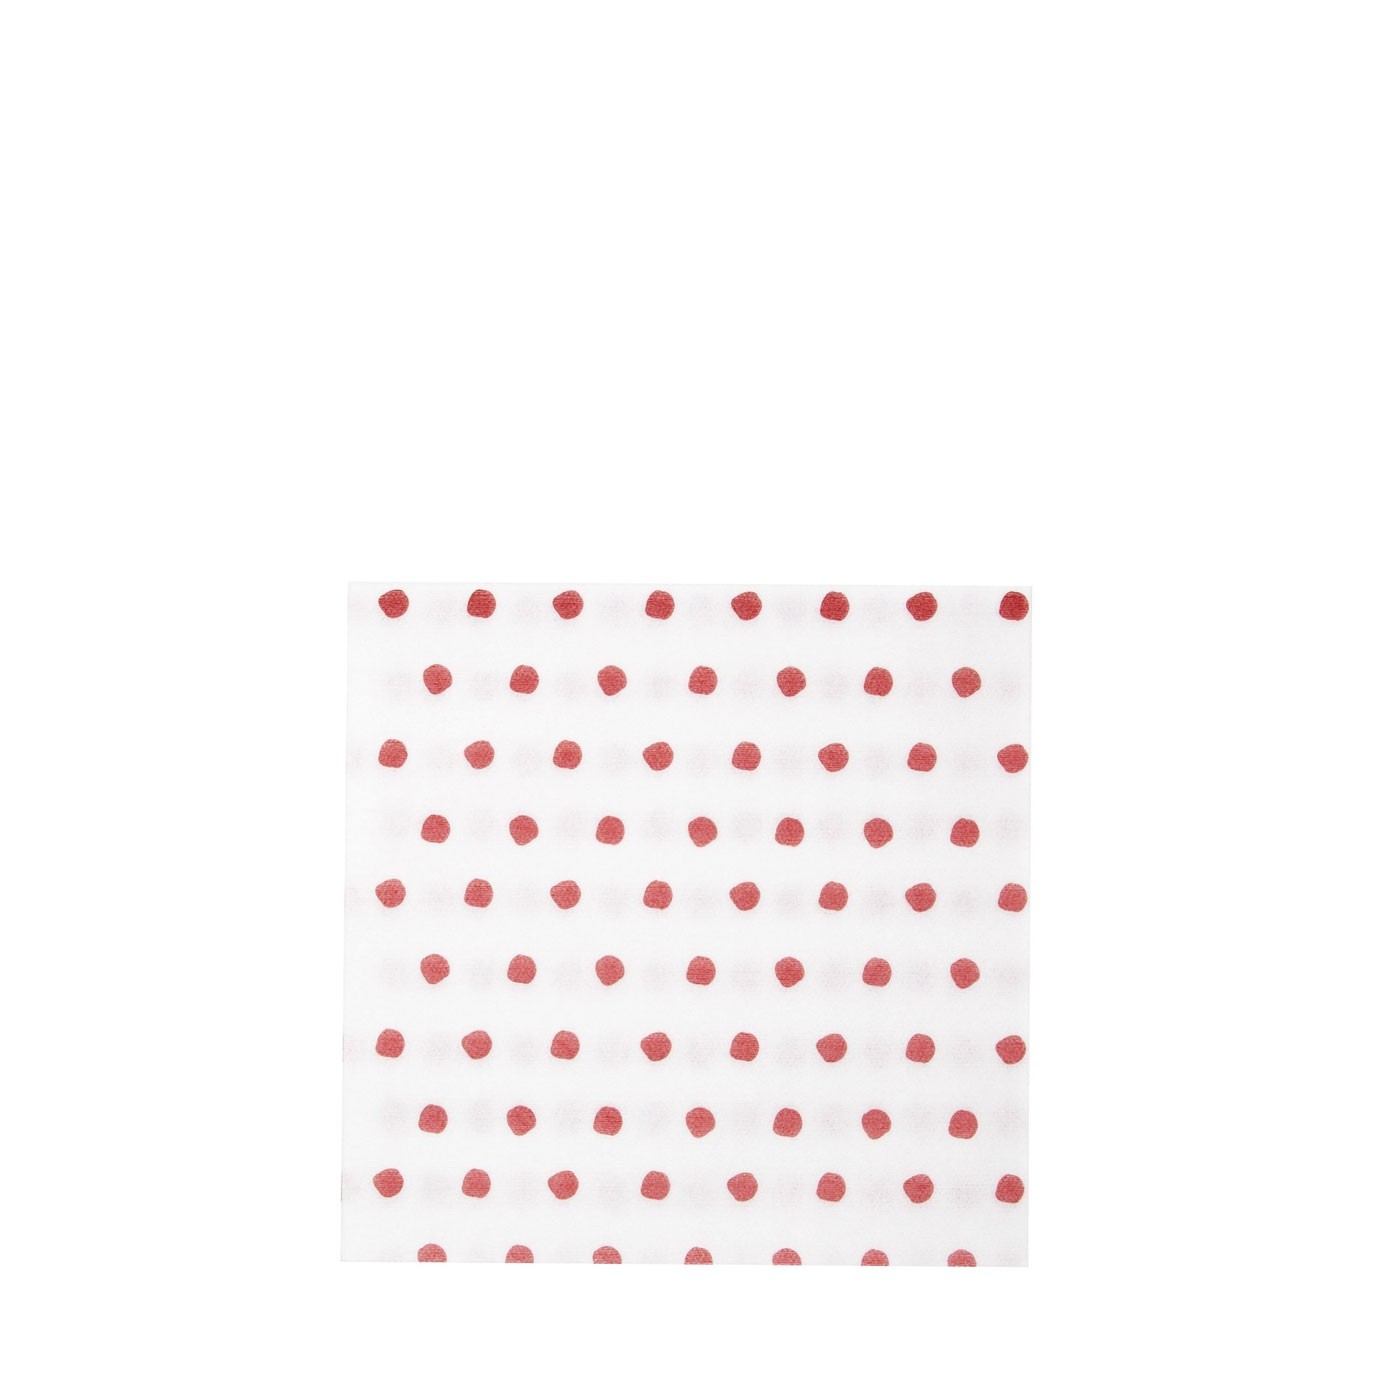 Papersoft Red Dots Cocktail Napkins - Vietri | Eataly.com